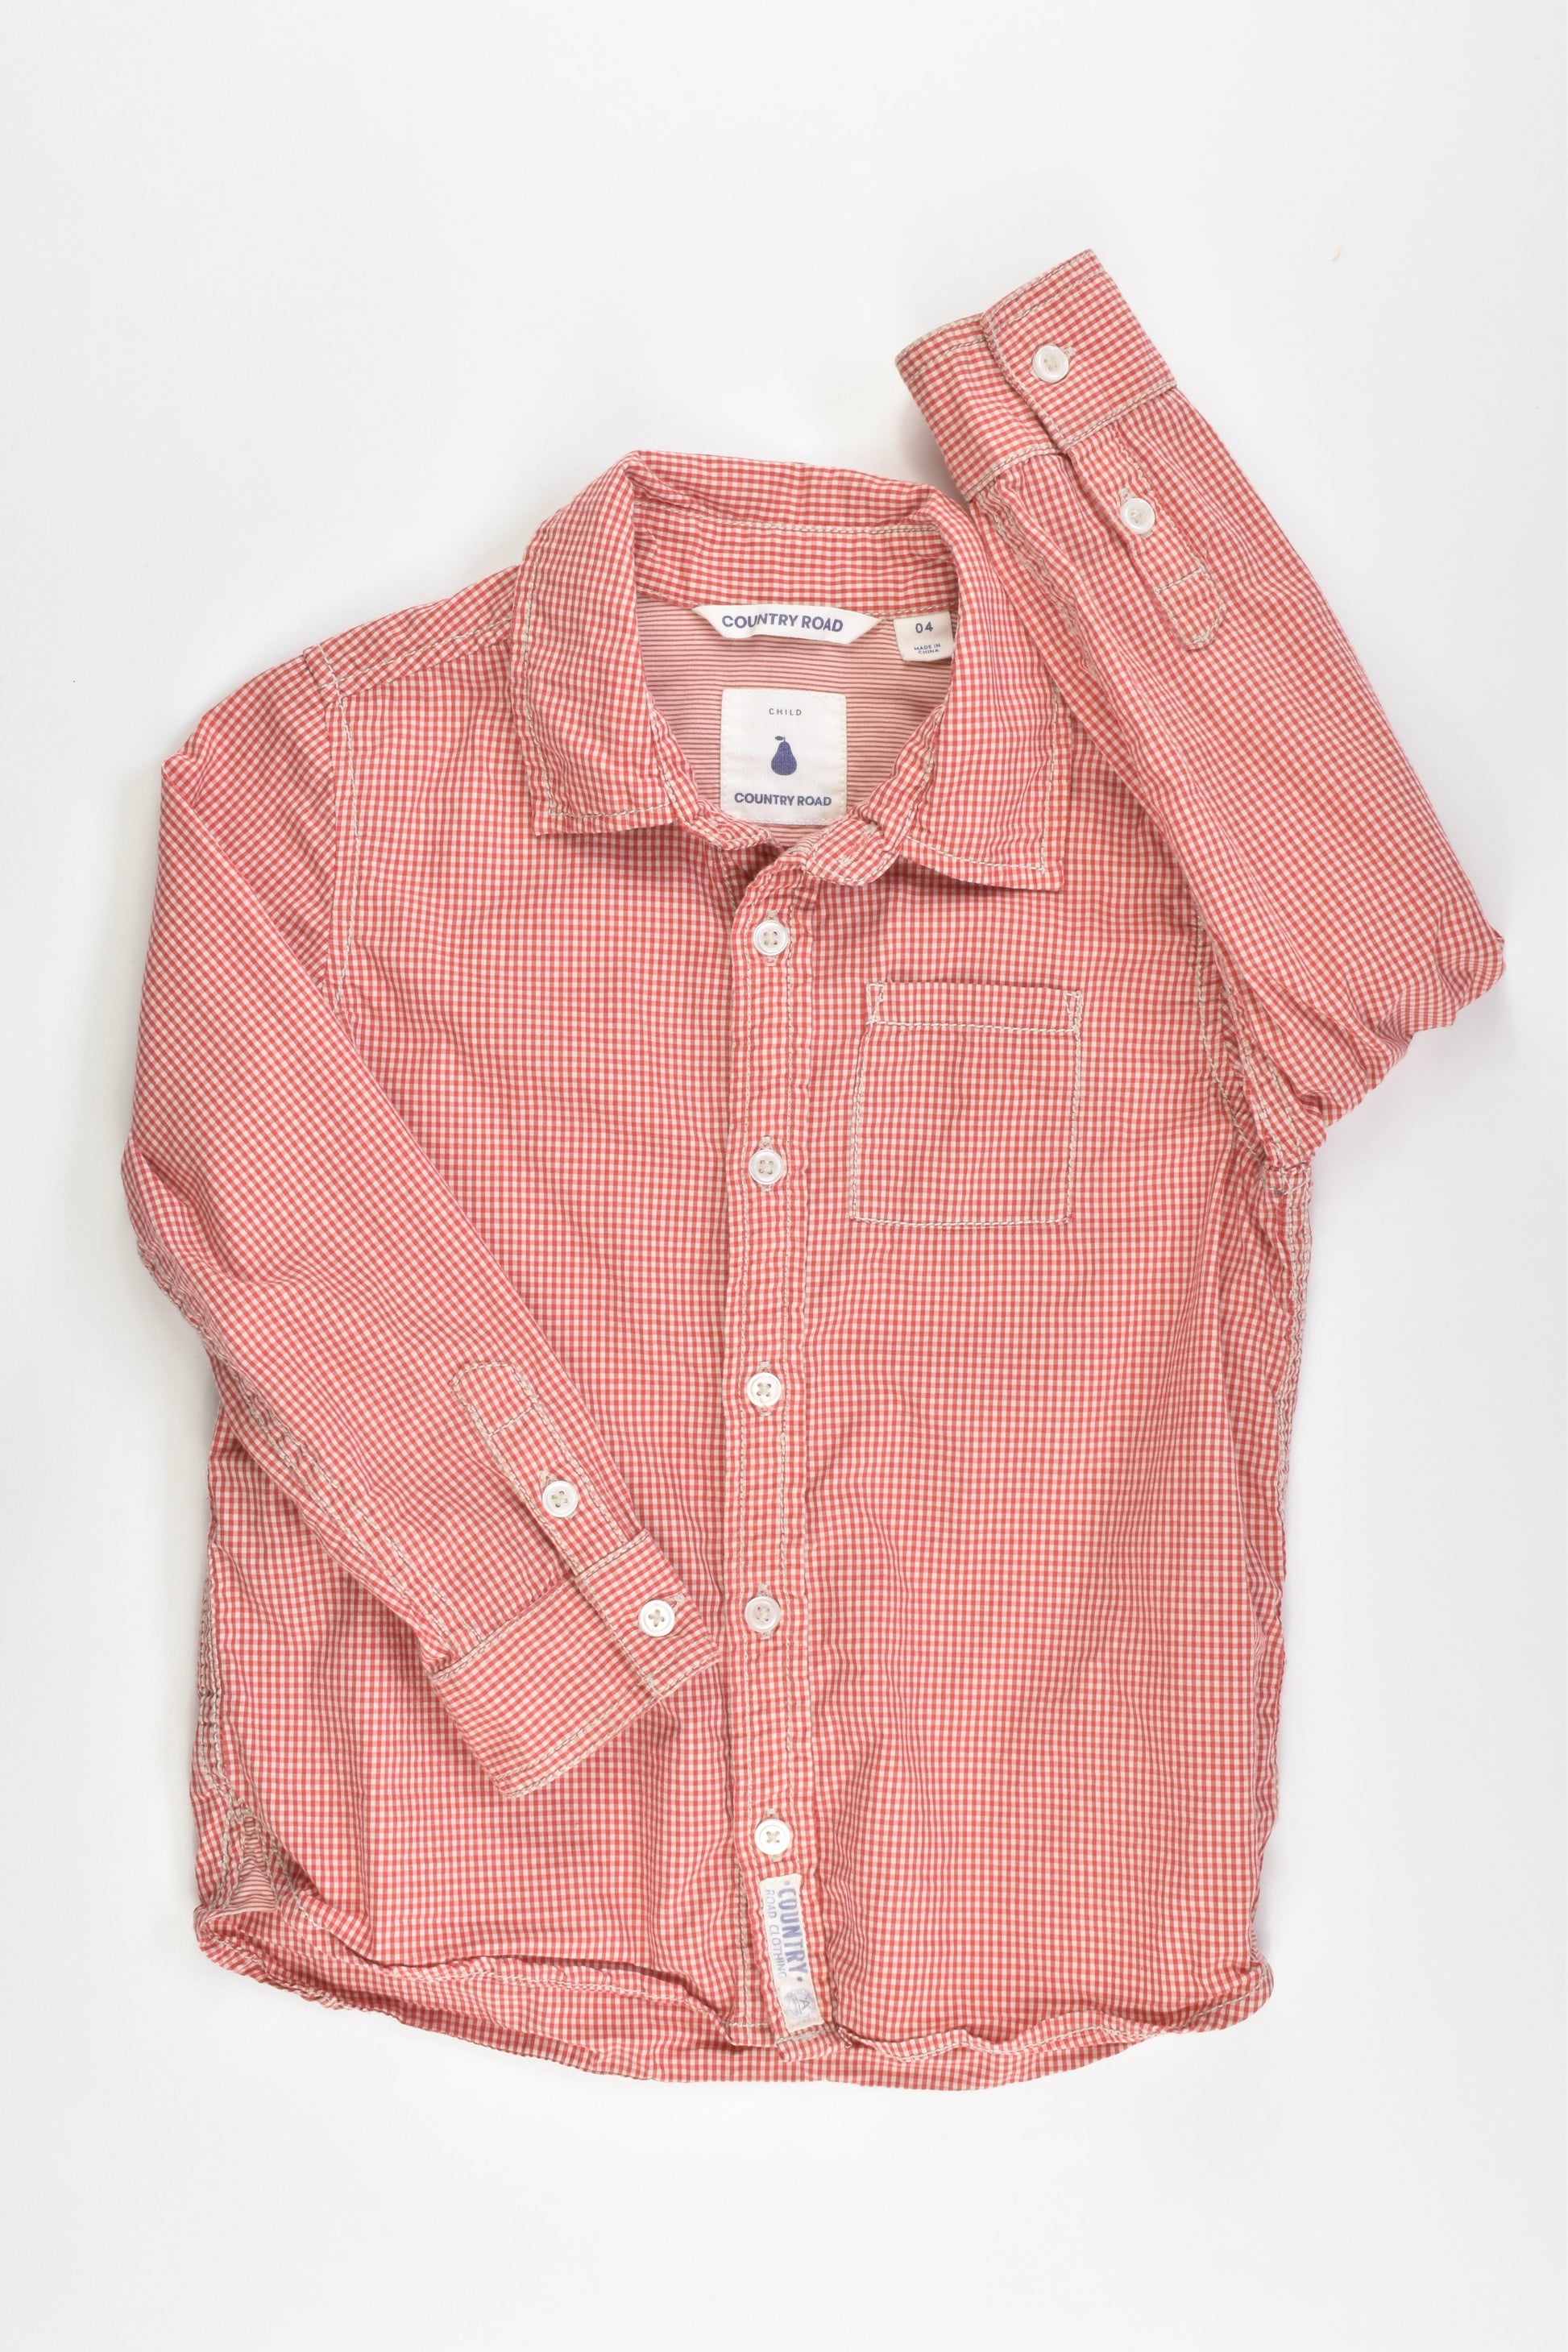 Country Road Size 4 Collared Shirt